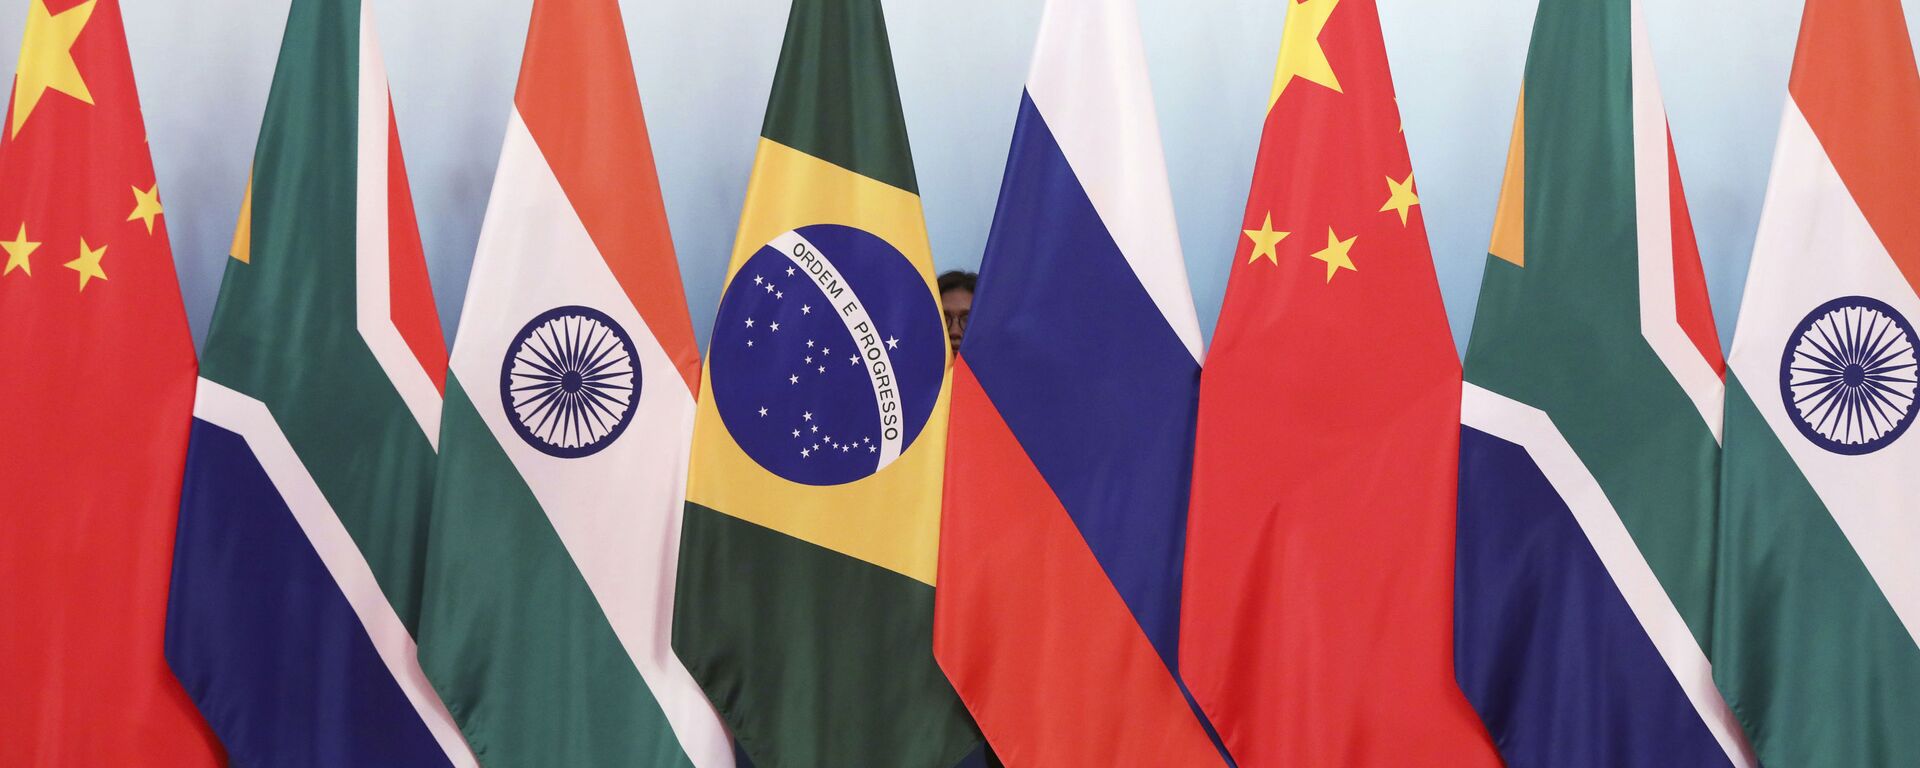 Staff worker stands behinds national flags of Brazil, Russia, China, South Africa and India to tidy the flags ahead of a group photo during the BRICS Summit at the Xiamen International Conference and Exhibition Center in Xiamen, southeastern China's Fujian Province, Monday, Sept. 4, 2017. - Sputnik International, 1920, 15.04.2022